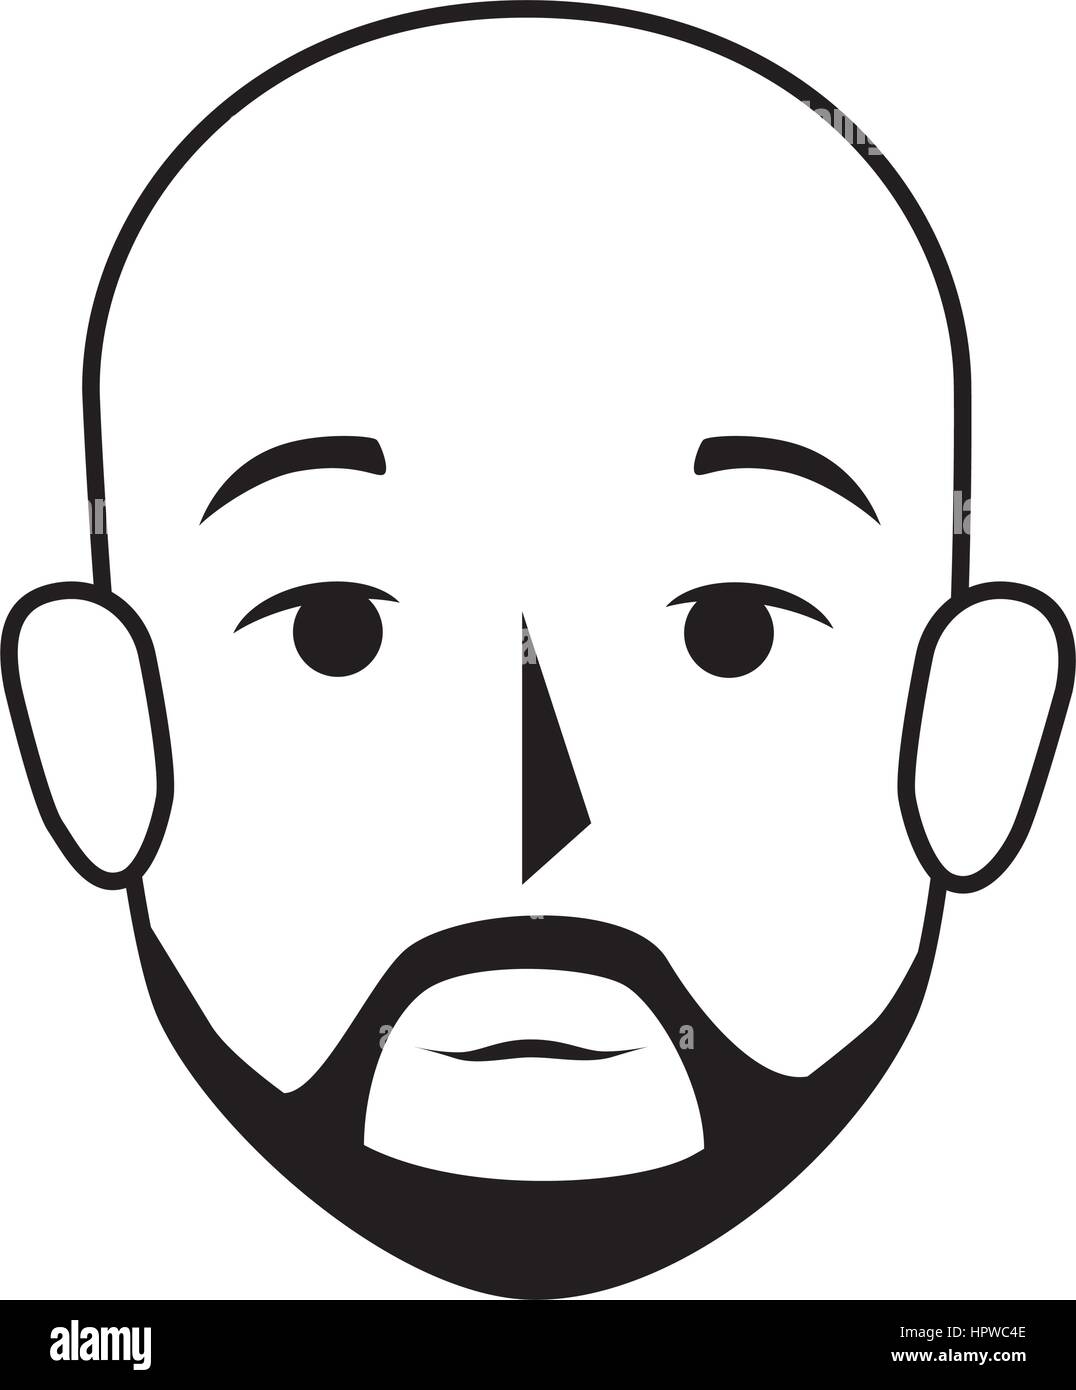 silhouette front view bald man with moustache Stock Vector